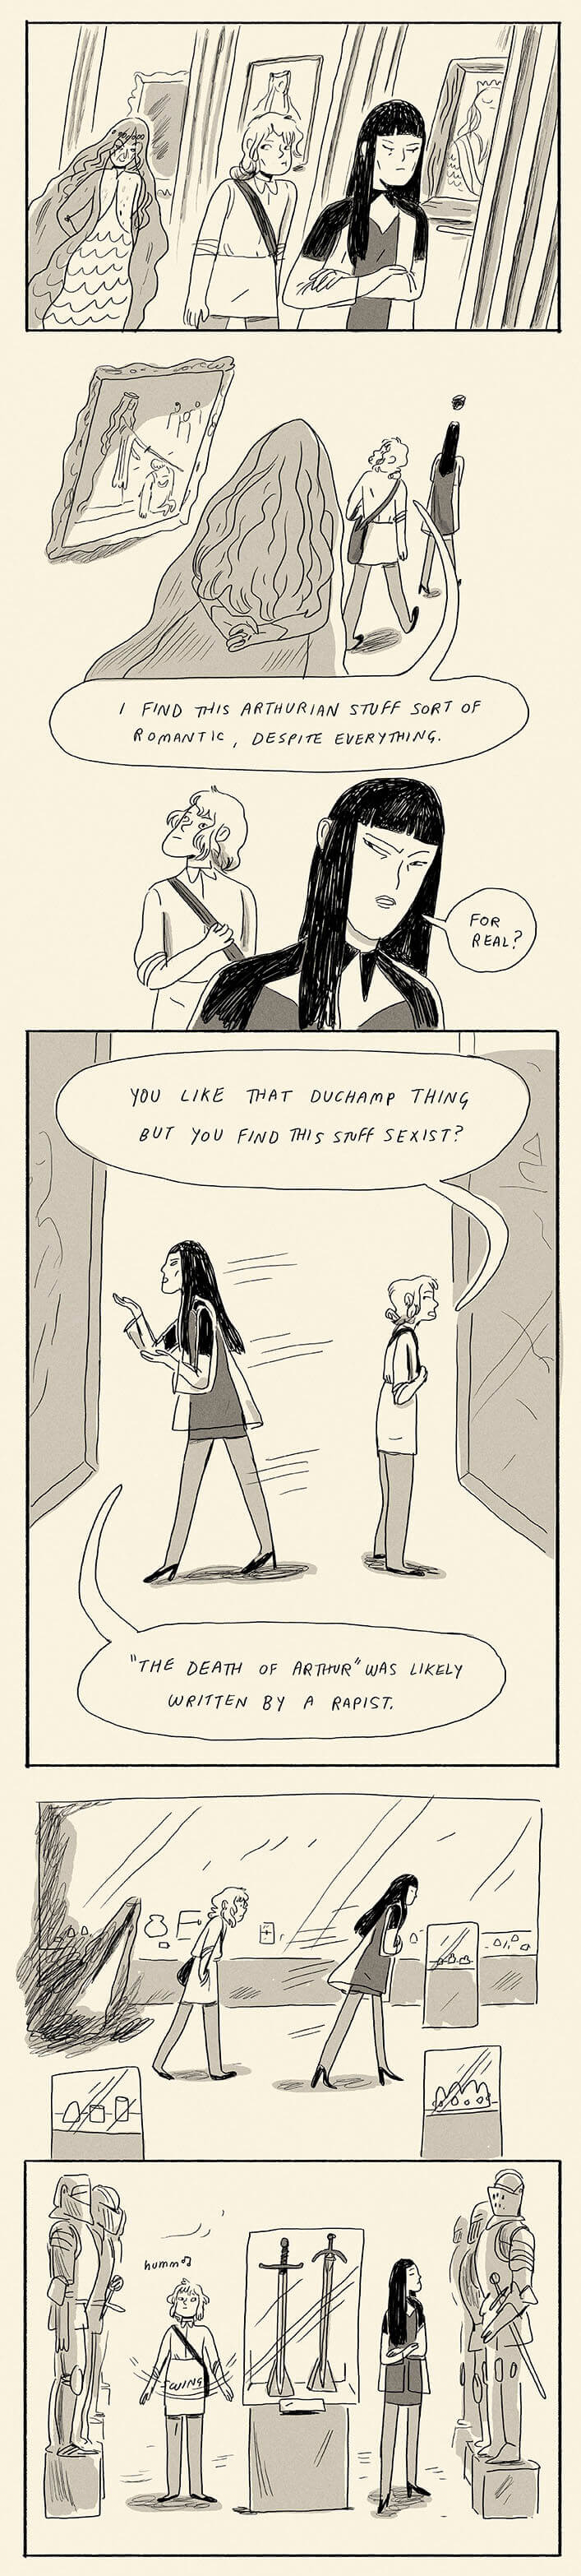 Straight Expectations Part 4 Panel 1 by Natalie Andrewson and Annie Mok for Hazlitt